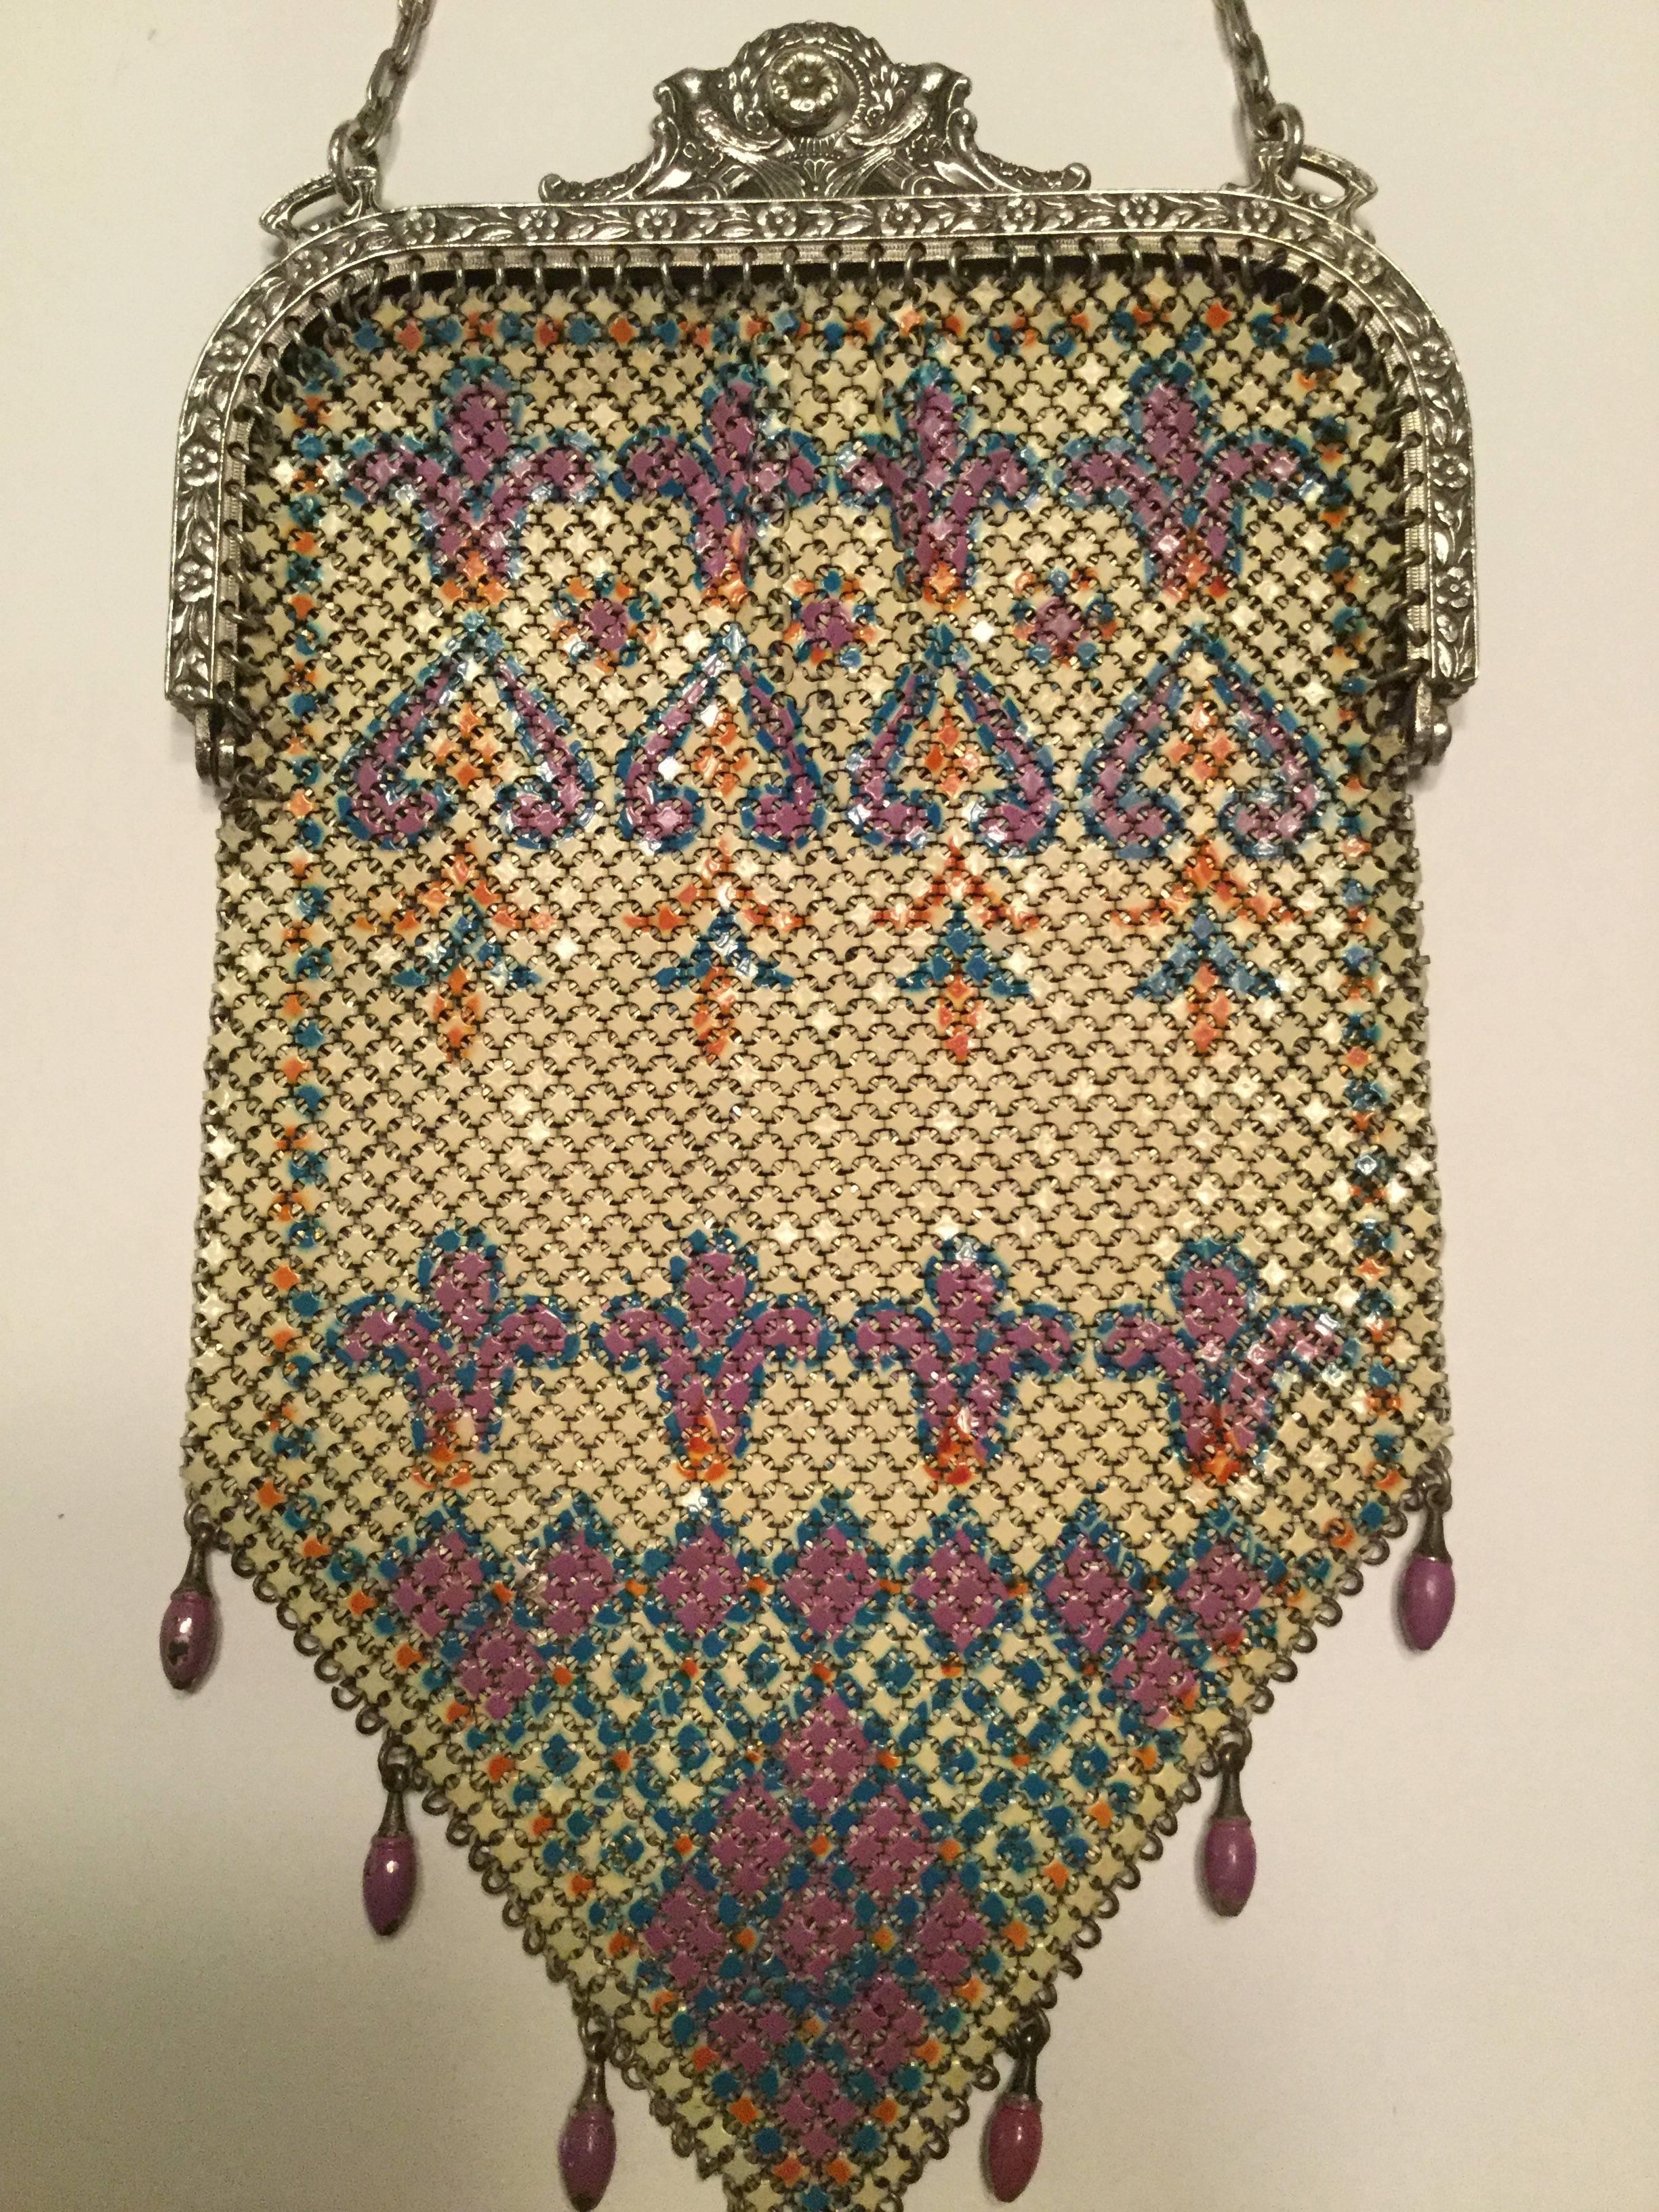 1920's Carpet style Art Deco flapper bag with a lustrous pearly enamel finish in gorgeous muted pastel tones. Intricate slinky chainmail mesh of individual enameled interlocked tiles. Incredible double bird clasp. Unlined. Signed: Mandalian. Great